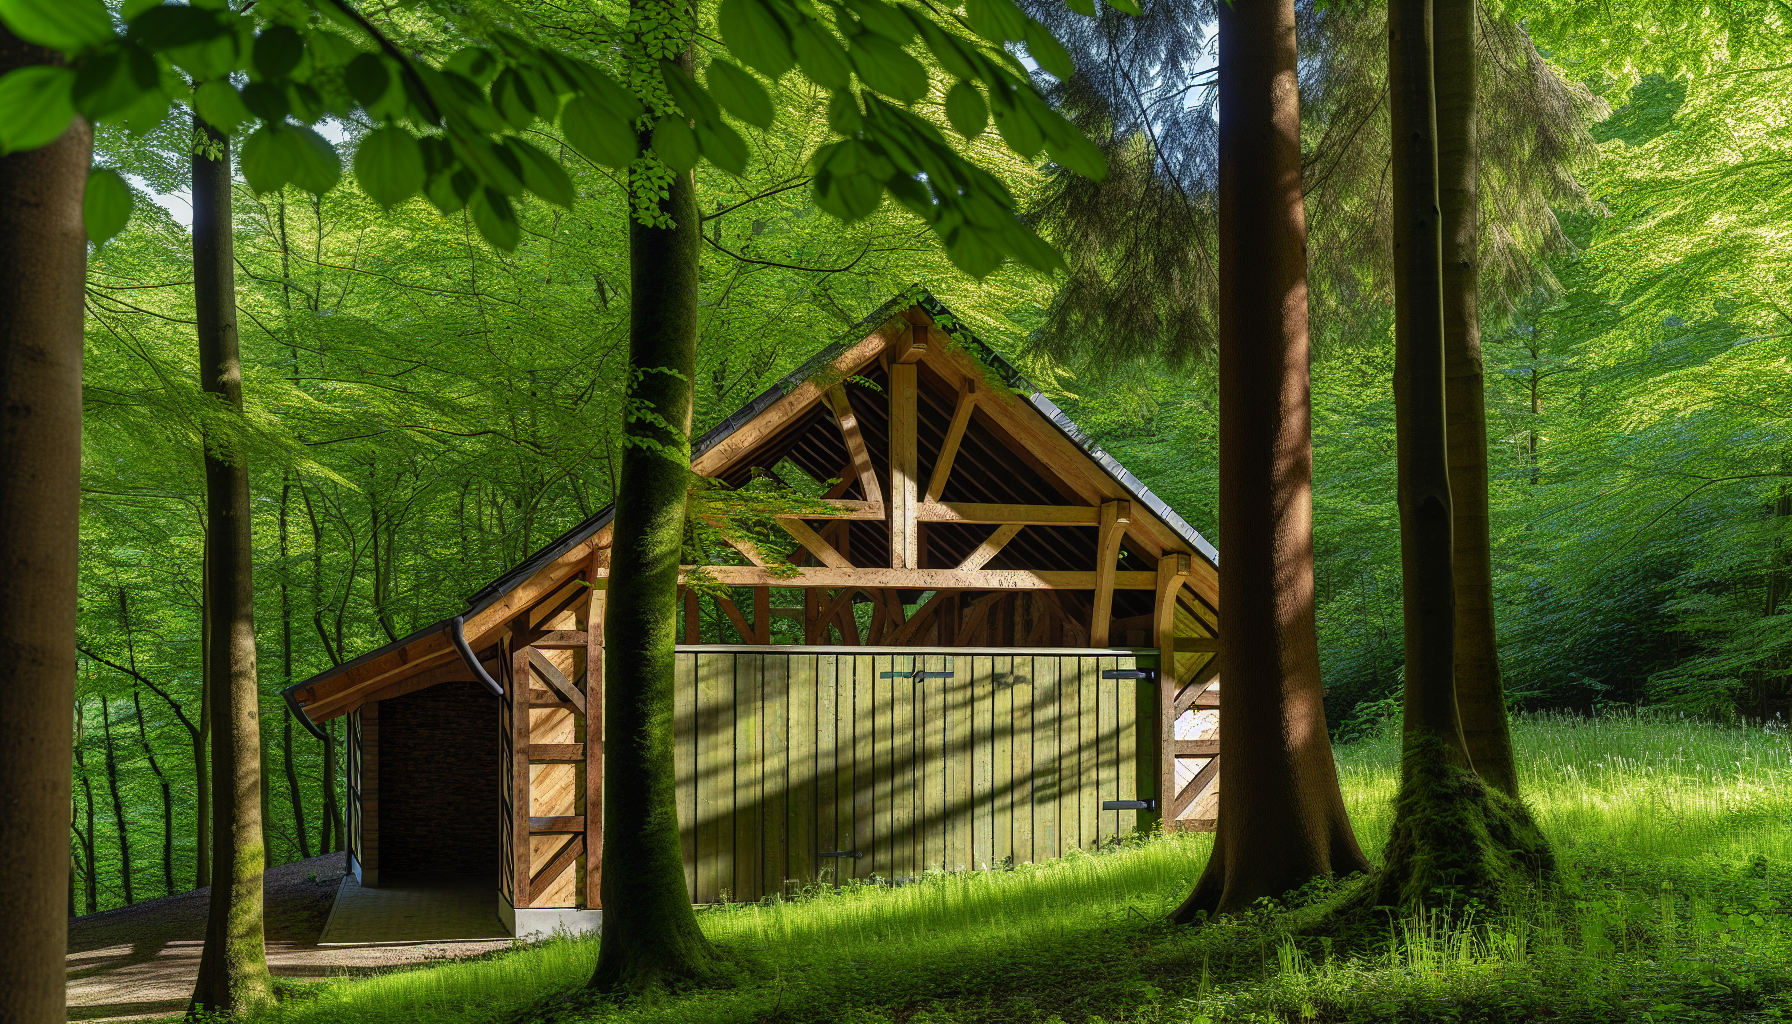 Timber frame garage surrounded by green trees and nature